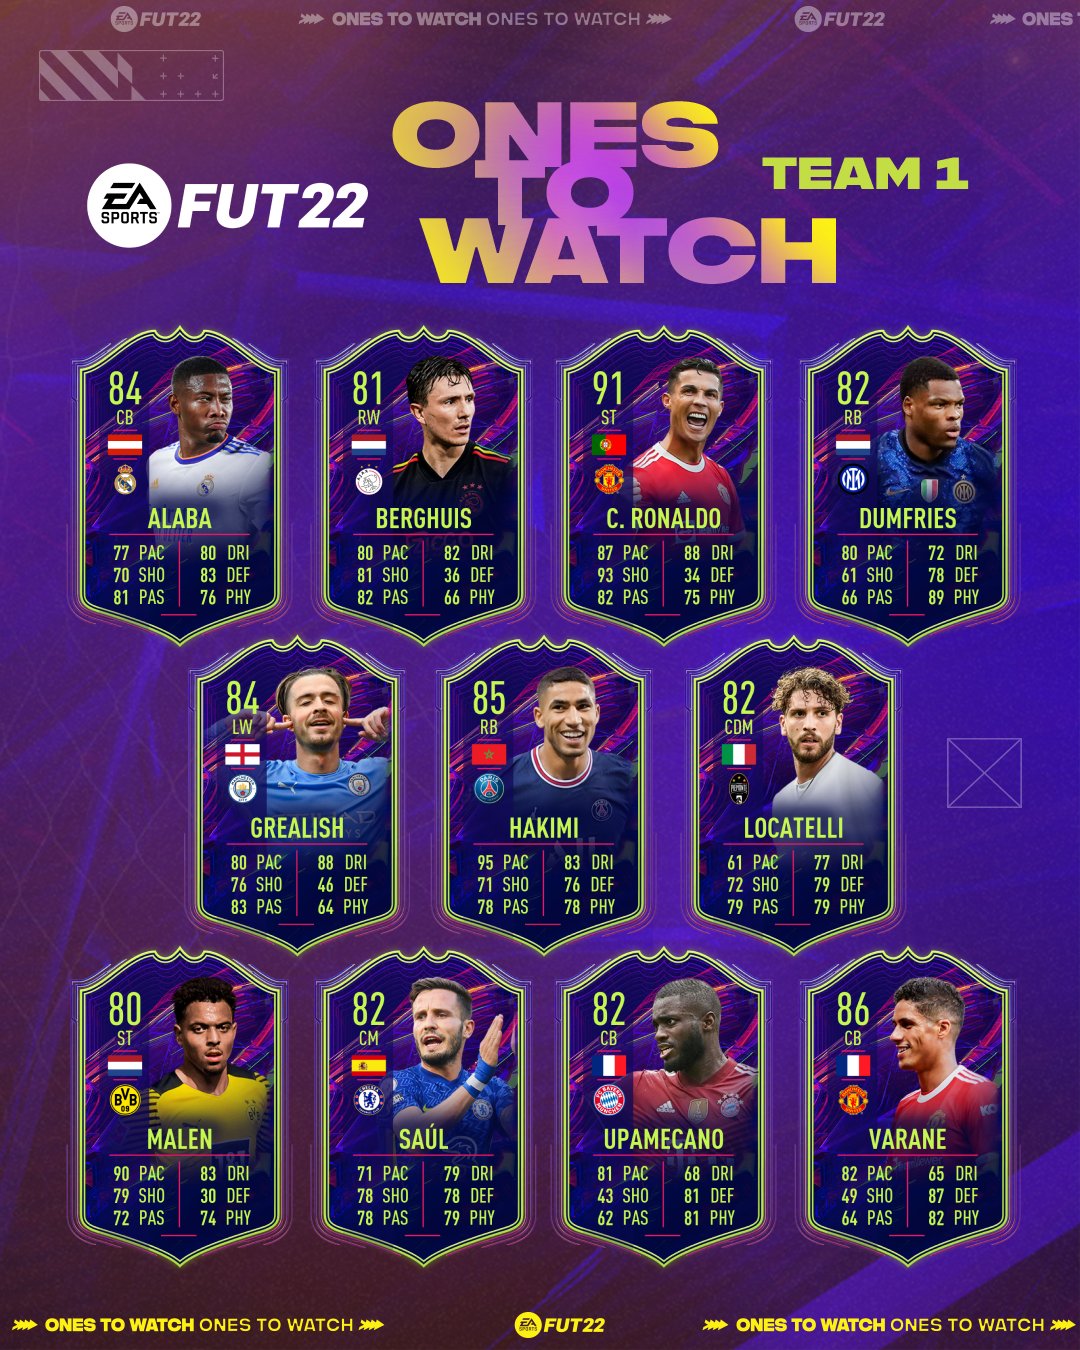 FIFA 22 Ultimate Team Ones to Watch Team 1